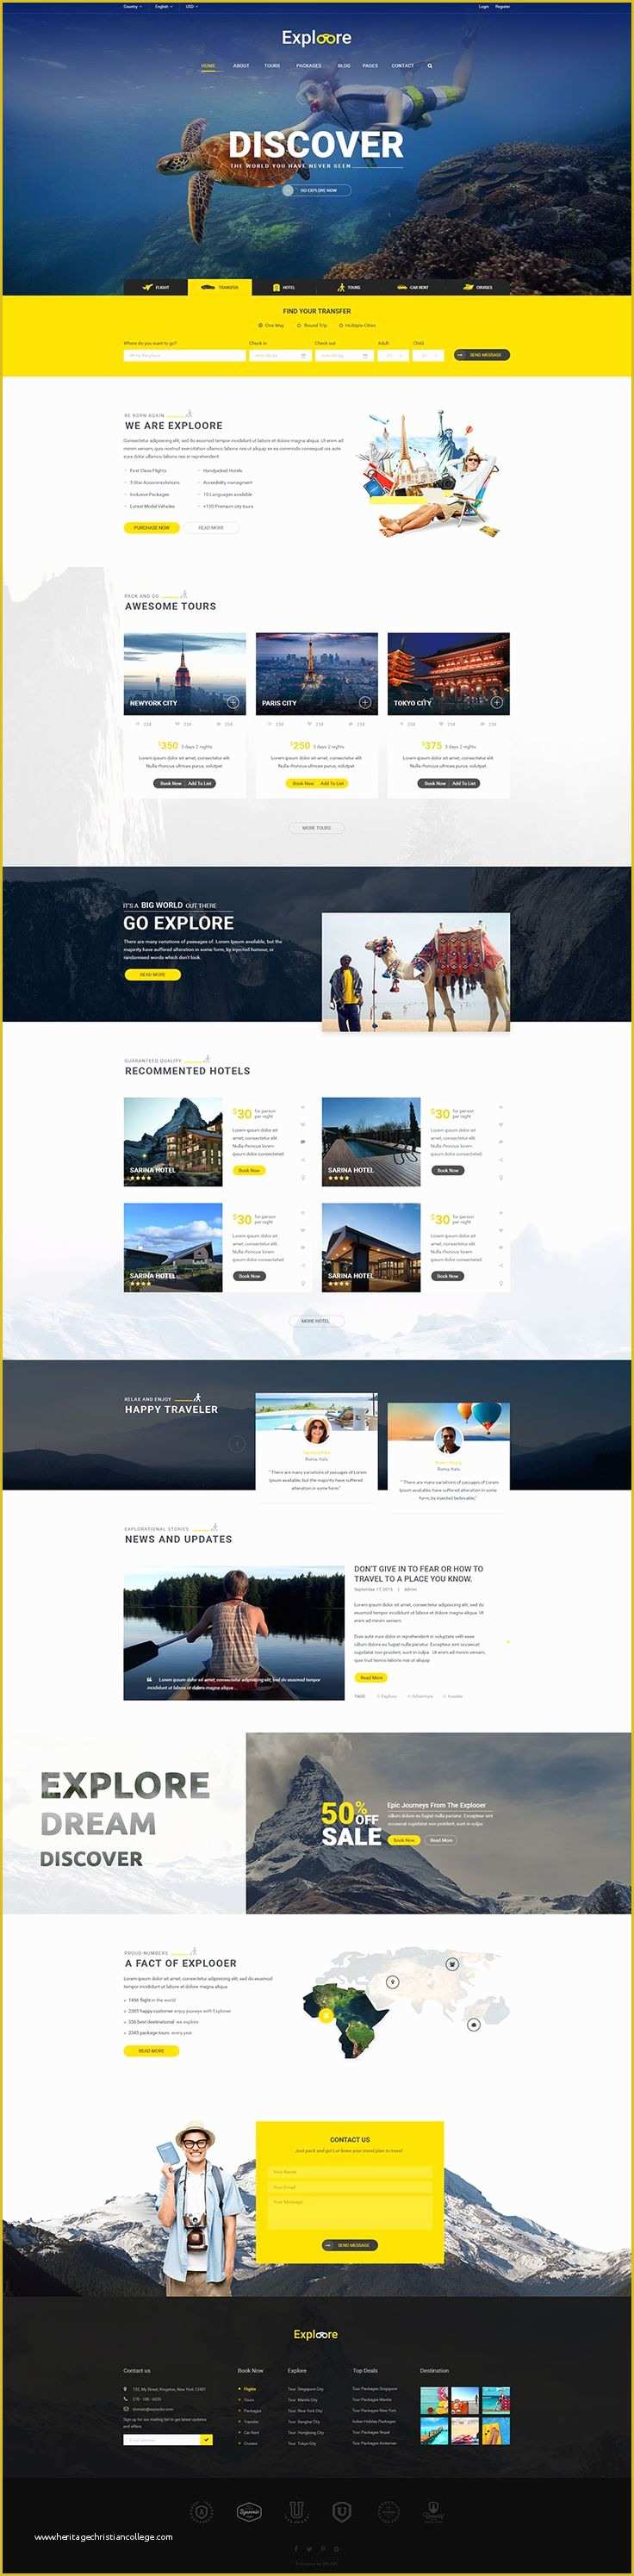 Travel Booking Website Templates Free Download Of 25 Best Ideas About Travel Design On Pinterest